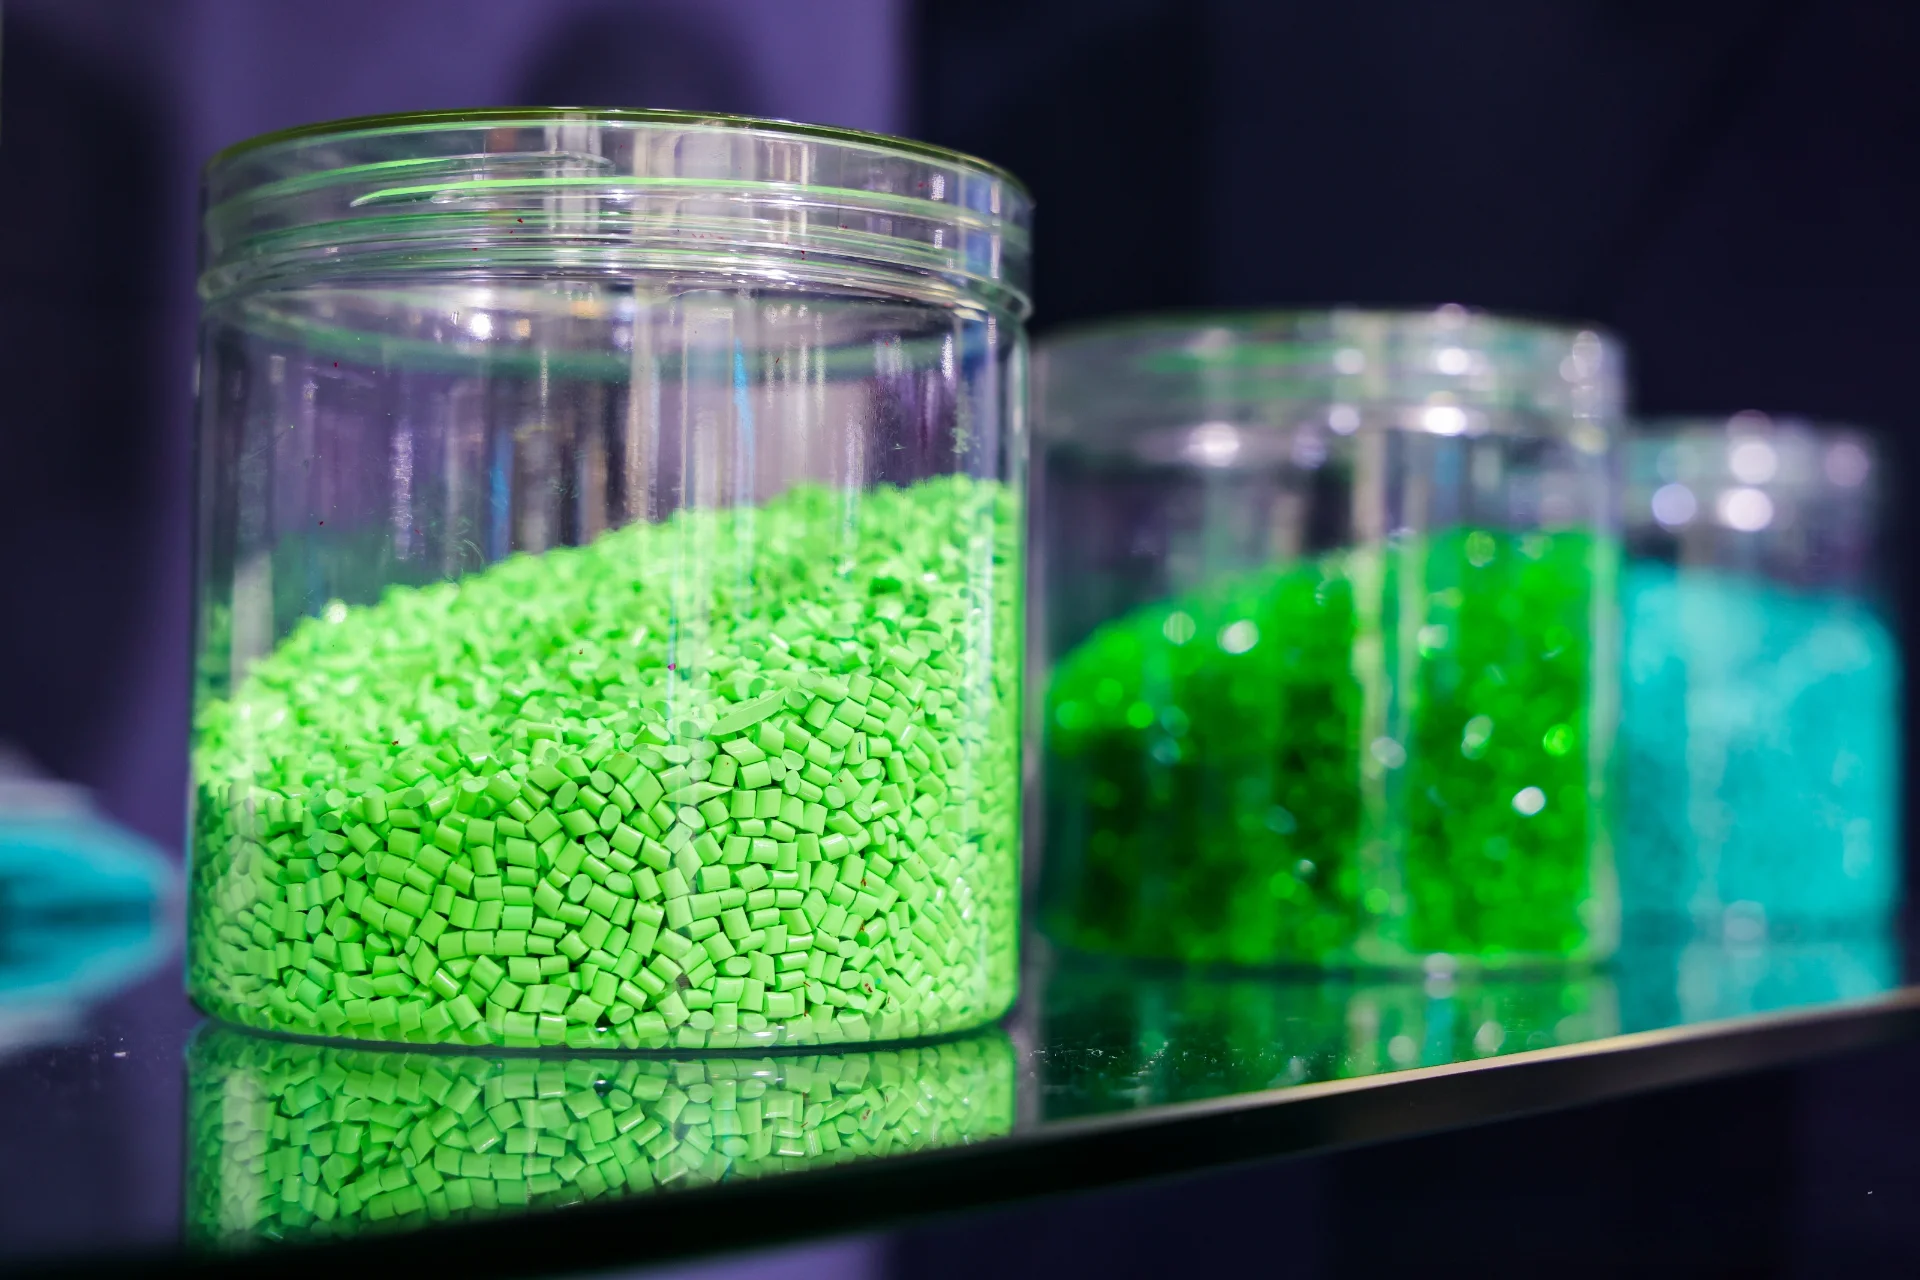 The picture shows a close-up of three glass jars containing colored plastic granules. The jar in the foreground is filled with bright green granules, while the jars in the background contain different shades of green and blue granules. These granules are typically used as raw material in the plastics industry for the manufacturing of various plastic products through processes like injection molding and extrusion.